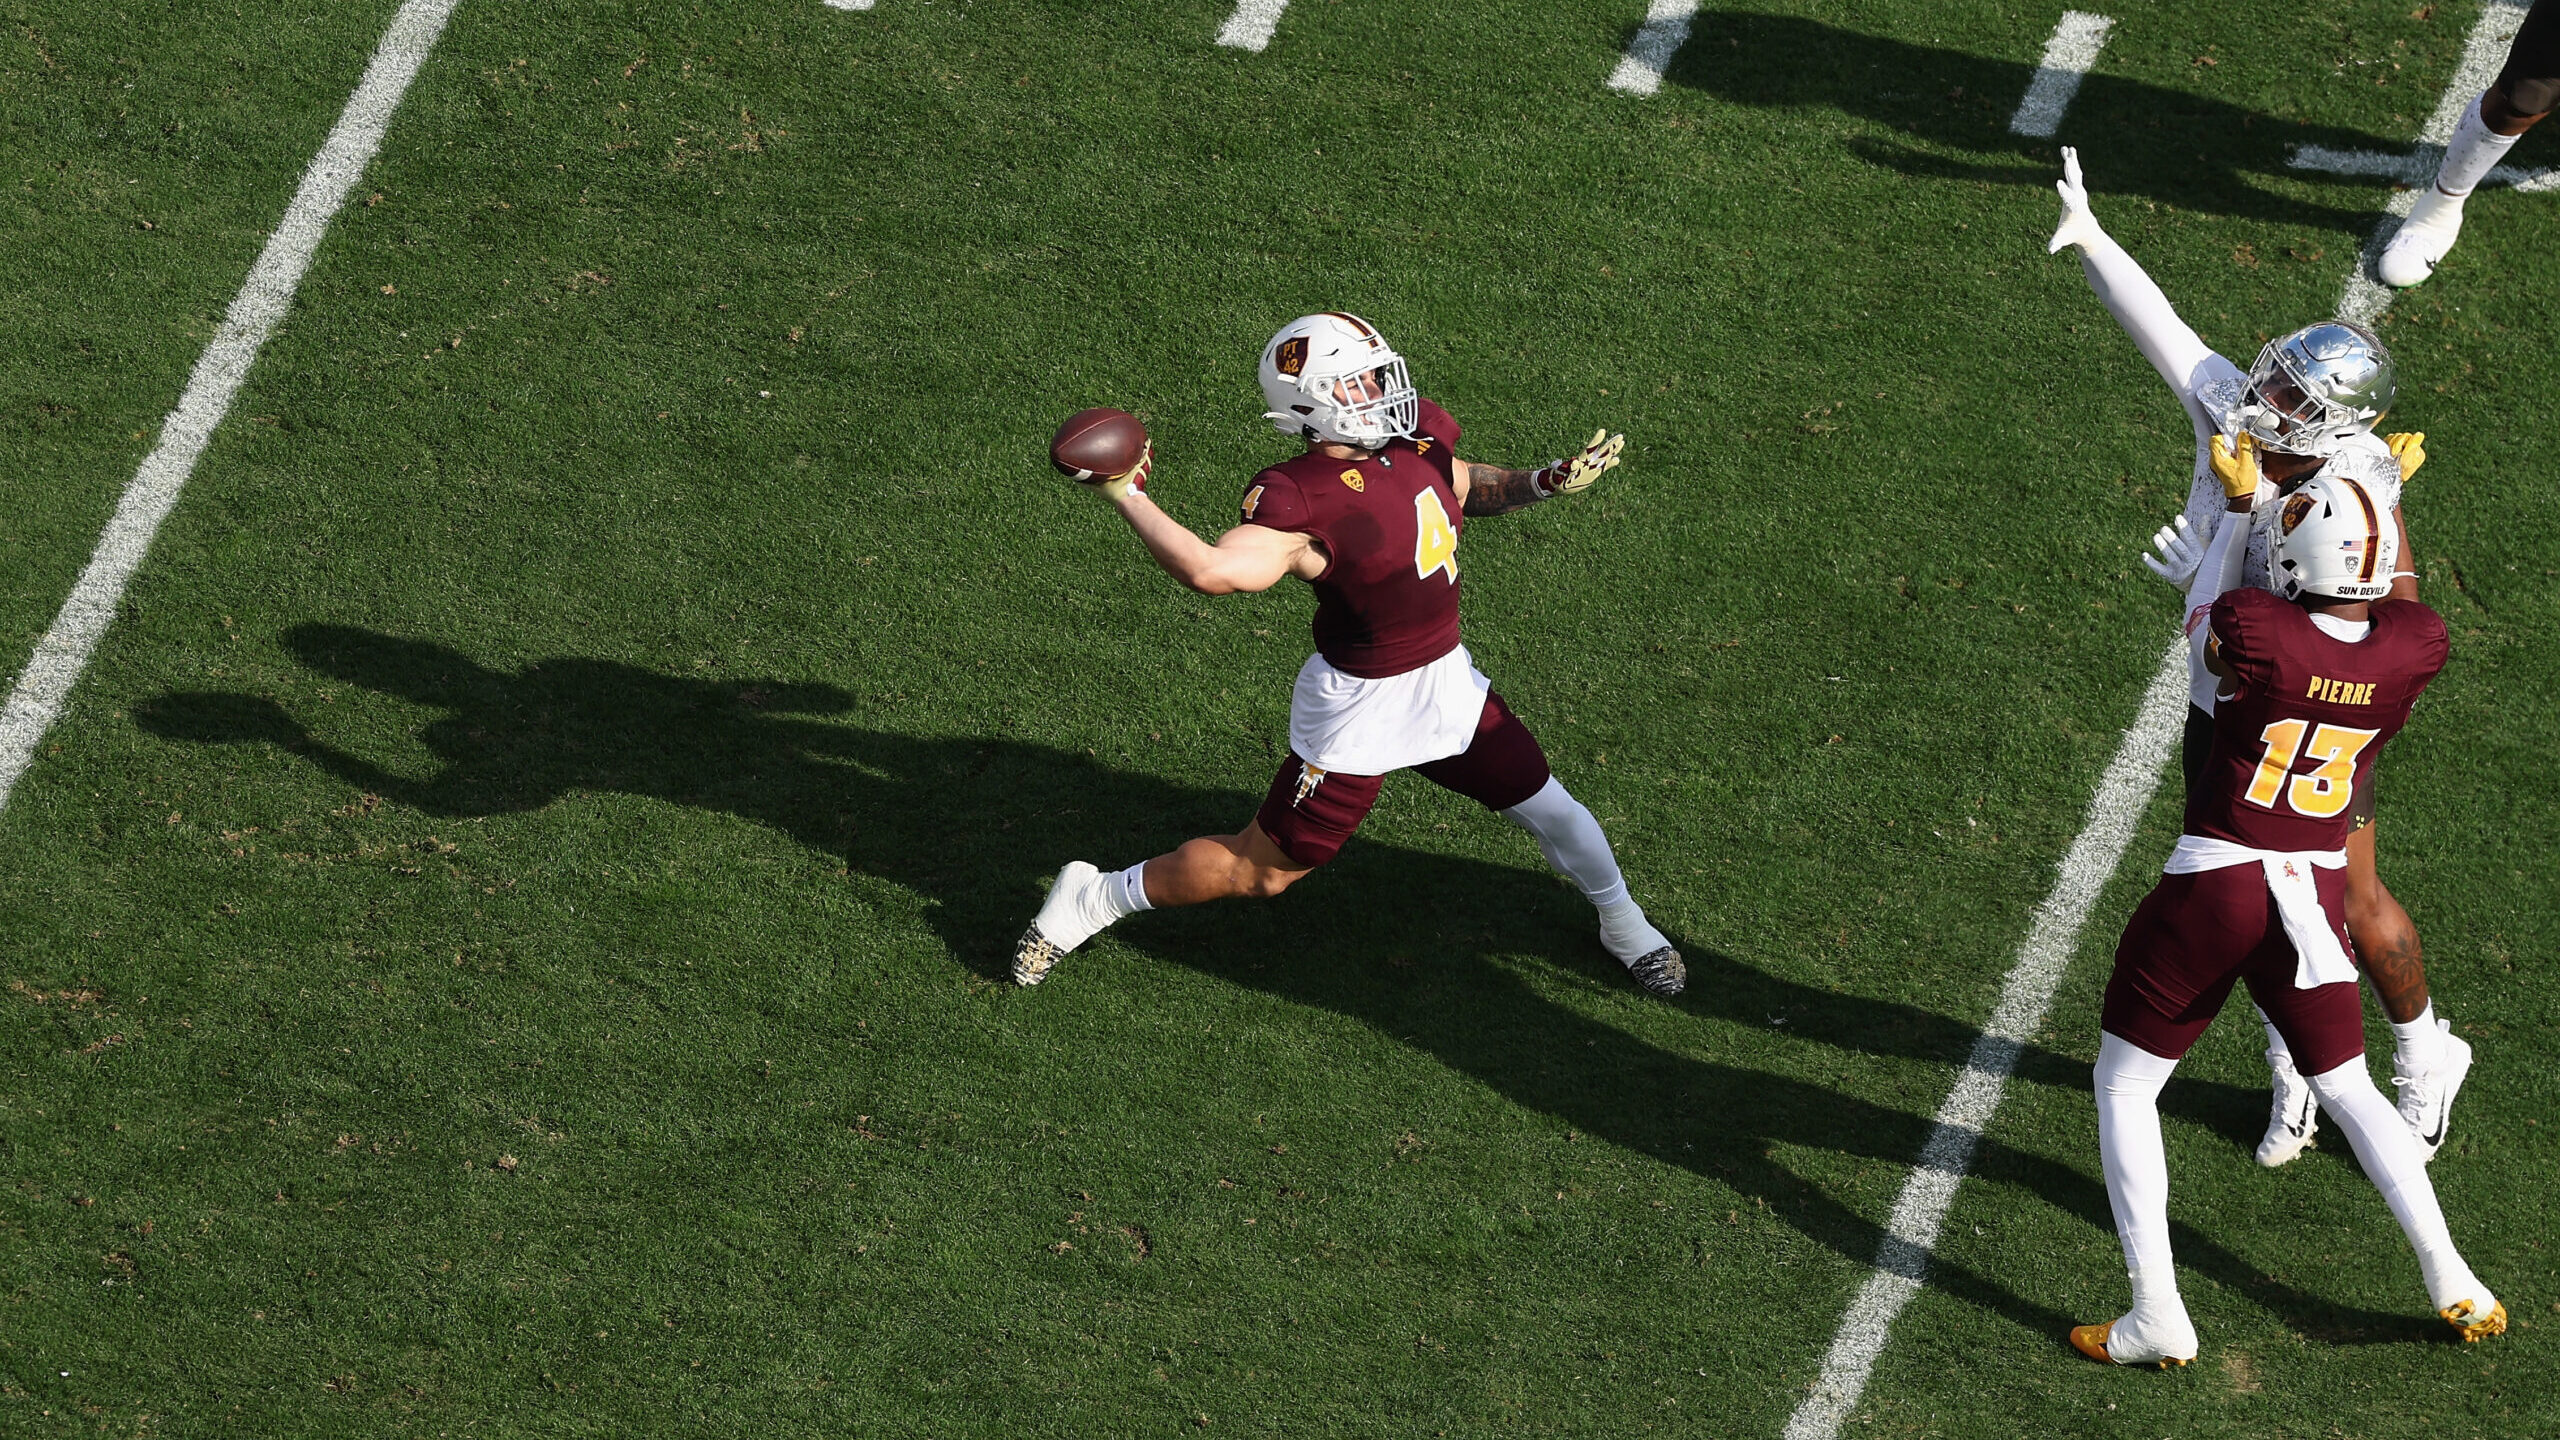 Running back Cameron Skattebo #4 of the Arizona State Sun Devils throws a pass during the first hal...